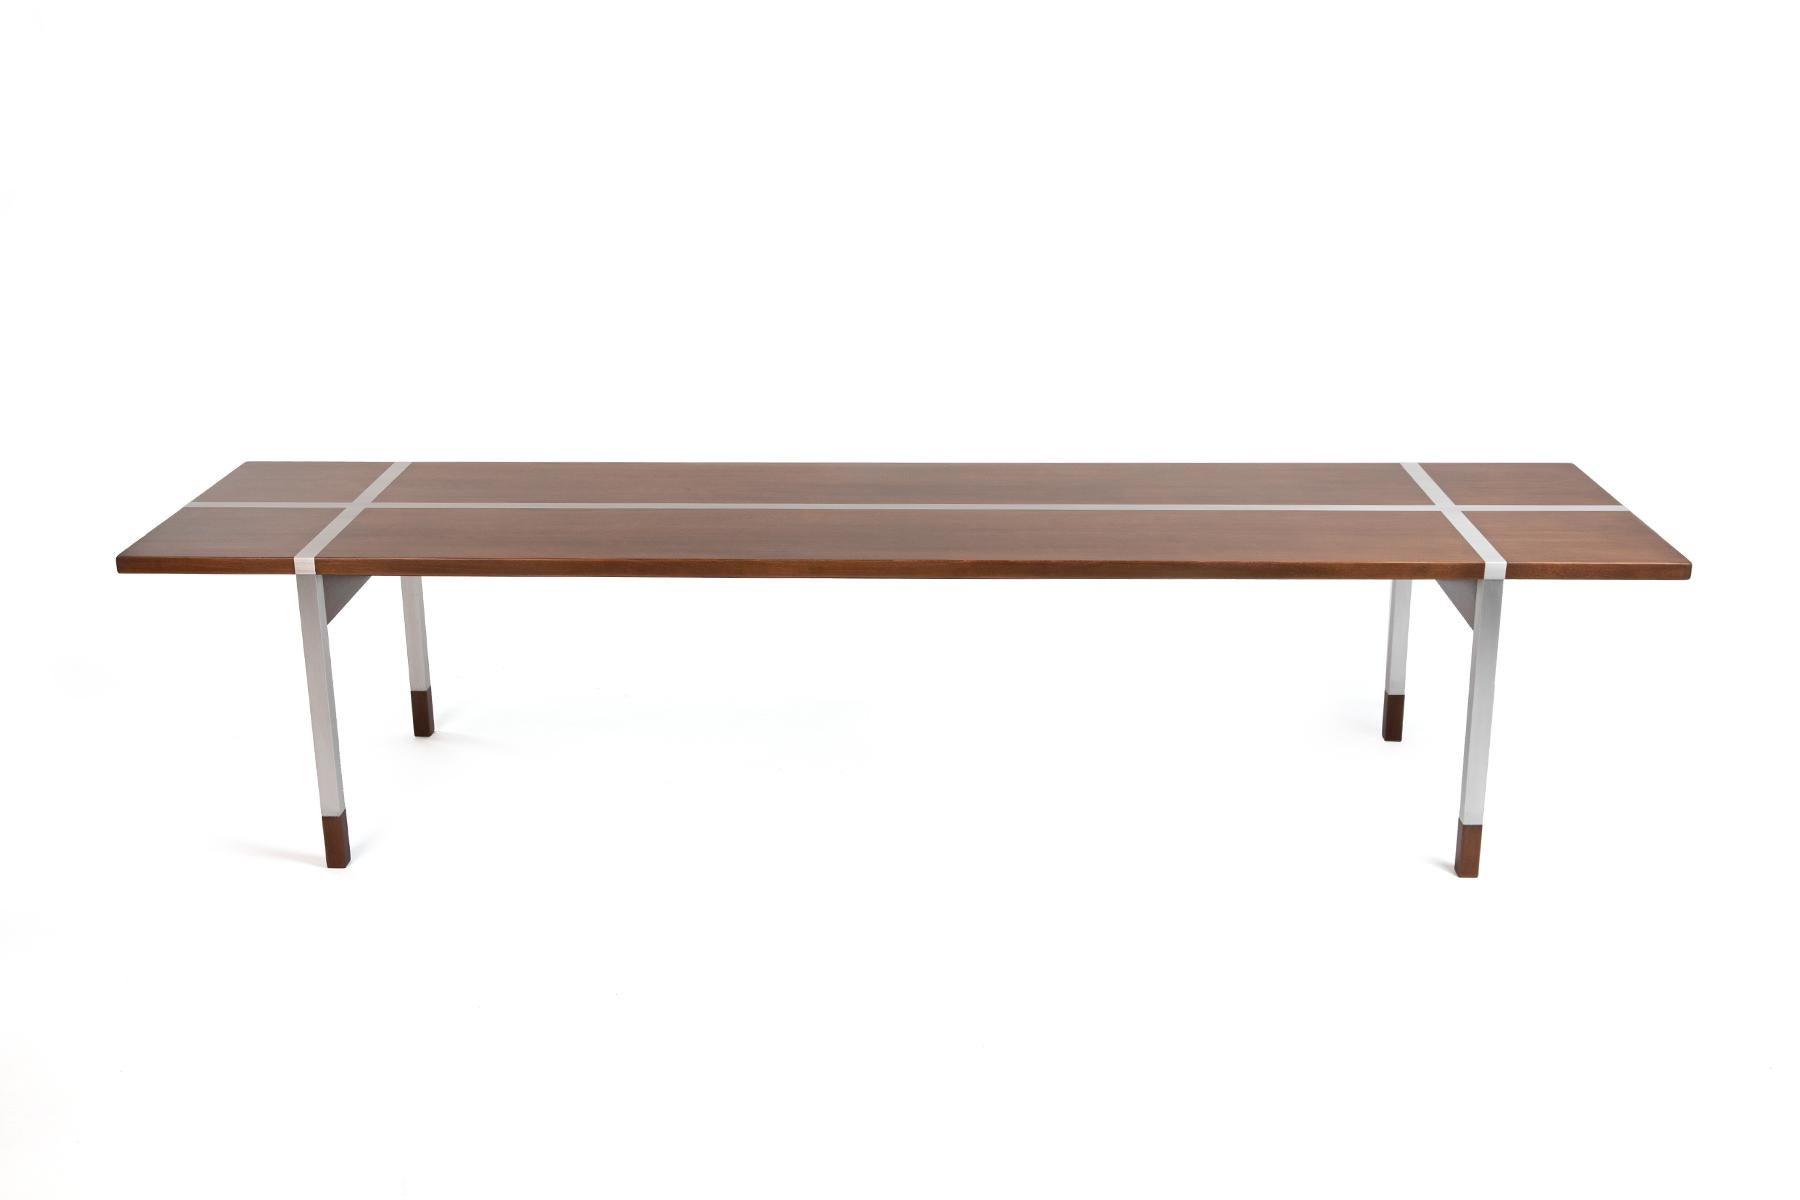 Striking walnut and aluminum coffee table by Selig circa early 1950s. Table has been newly polished and refinished.